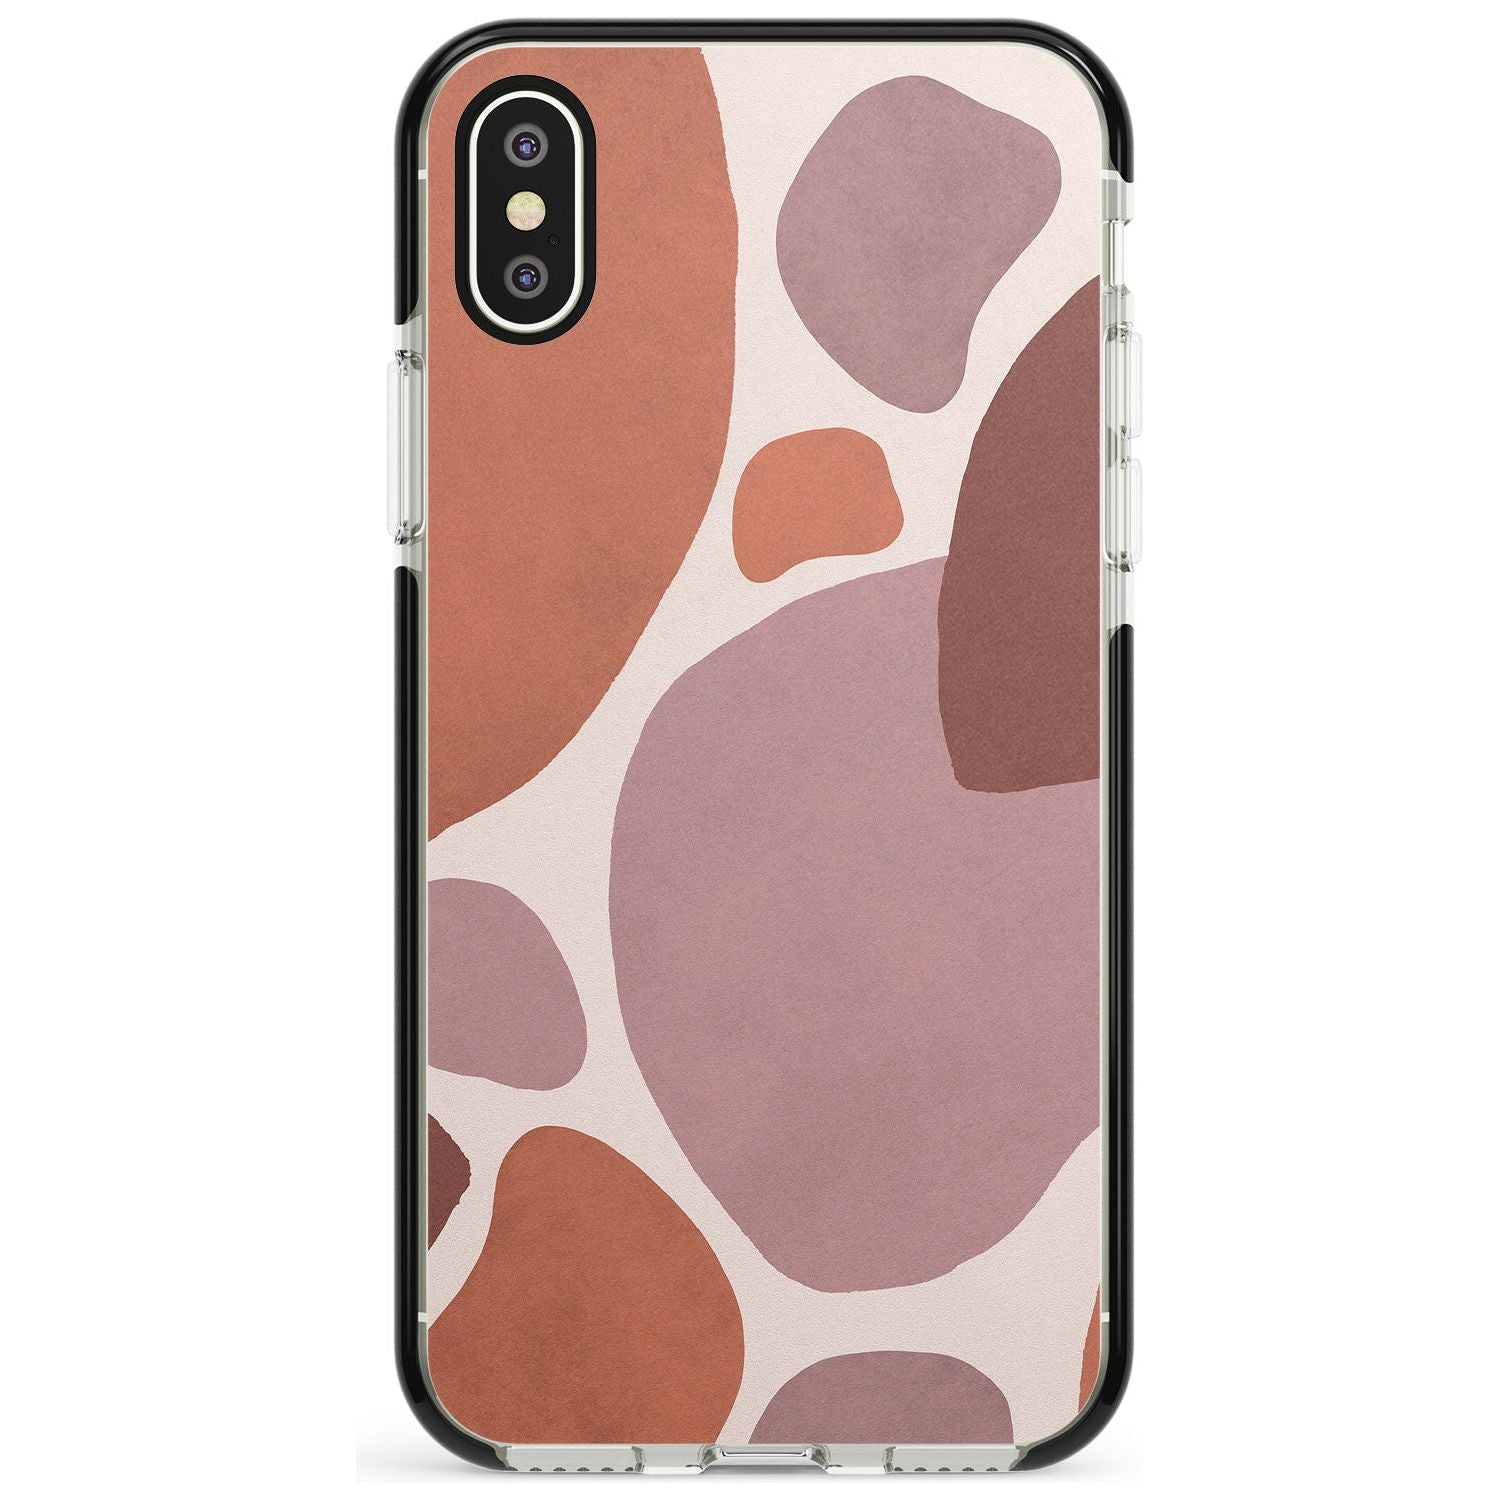 Lush Abstract Watercolour Black Impact Phone Case for iPhone X XS Max XR